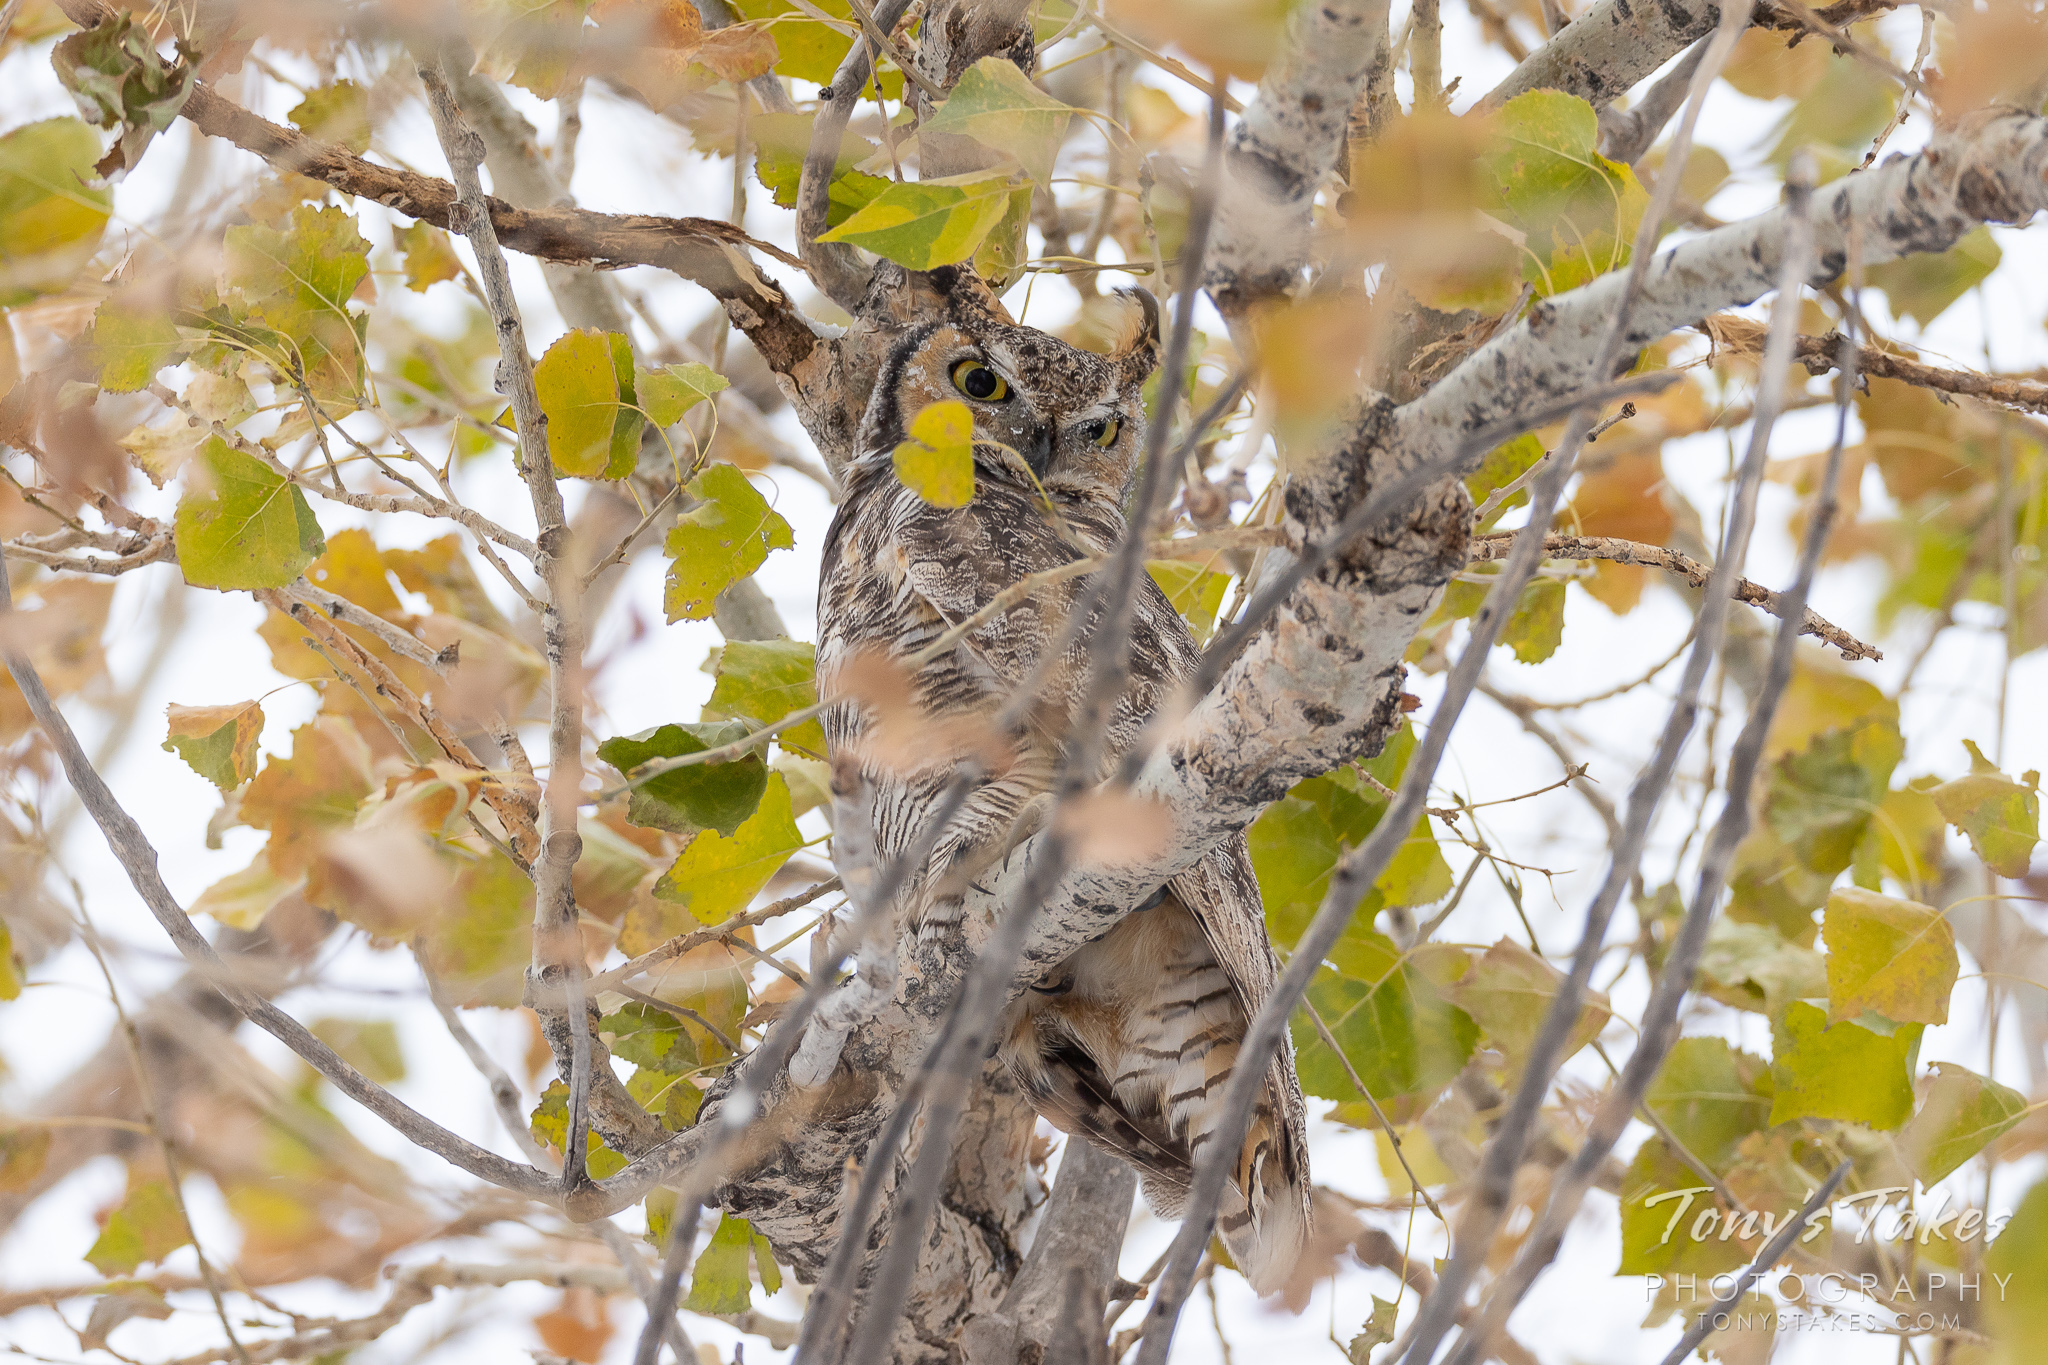 Icy eyebrows on a Great Horned Owl. The #weather this past Sunday was not particularly hospitable with…